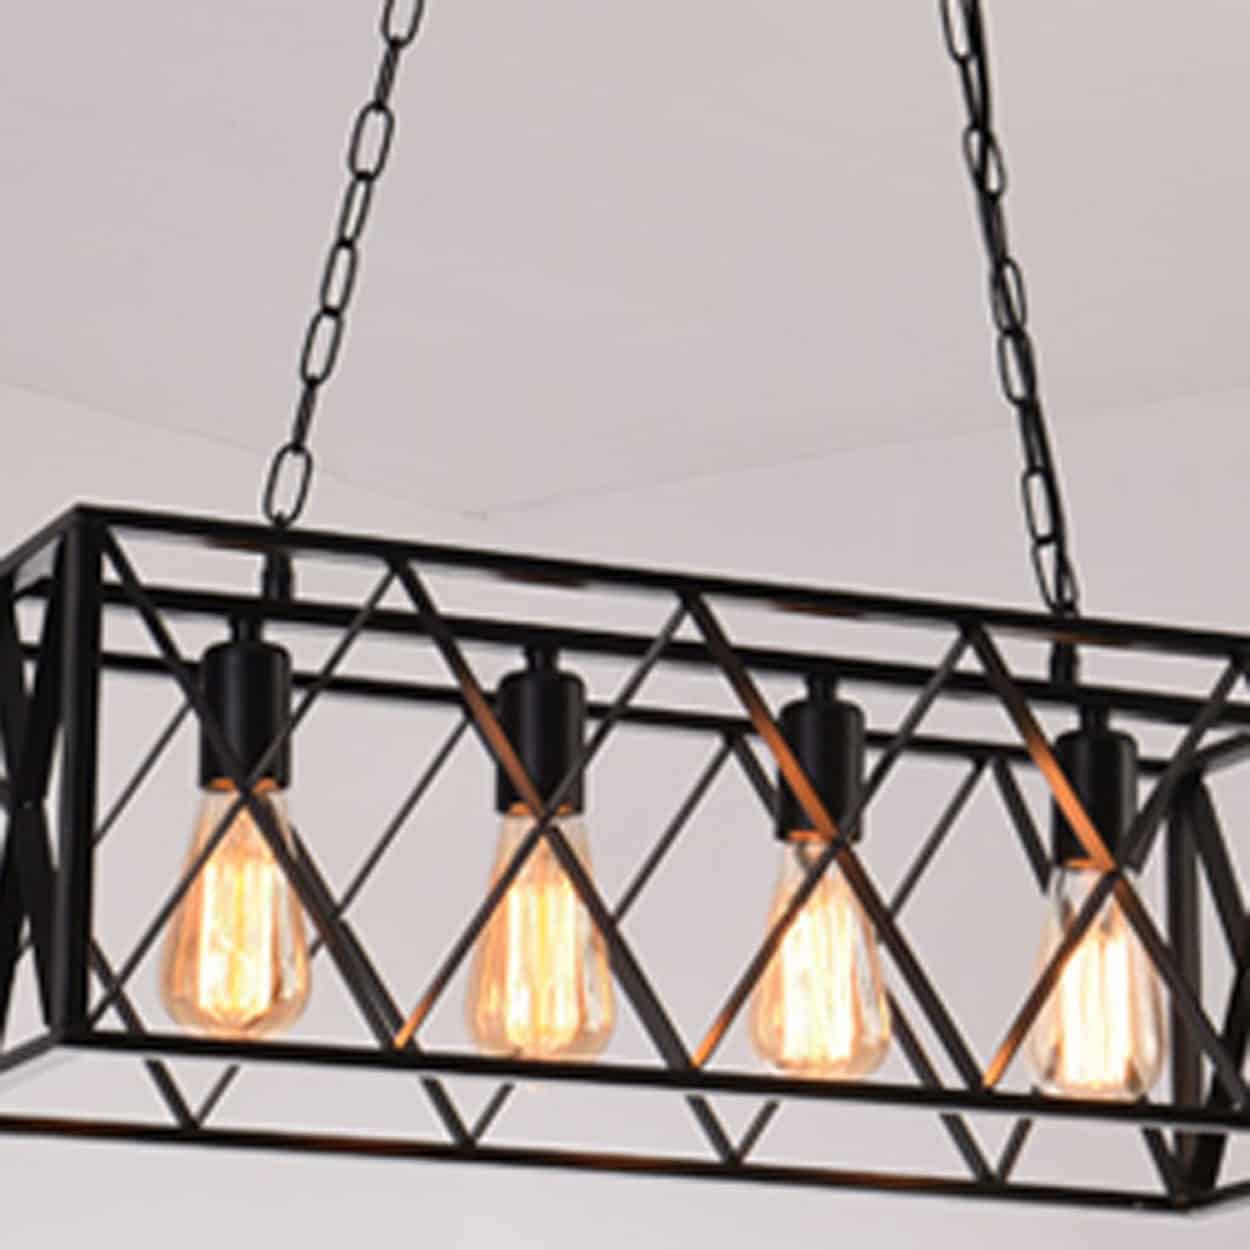 Xenophon Metalworks Long Case Industrial Hanging Lamp